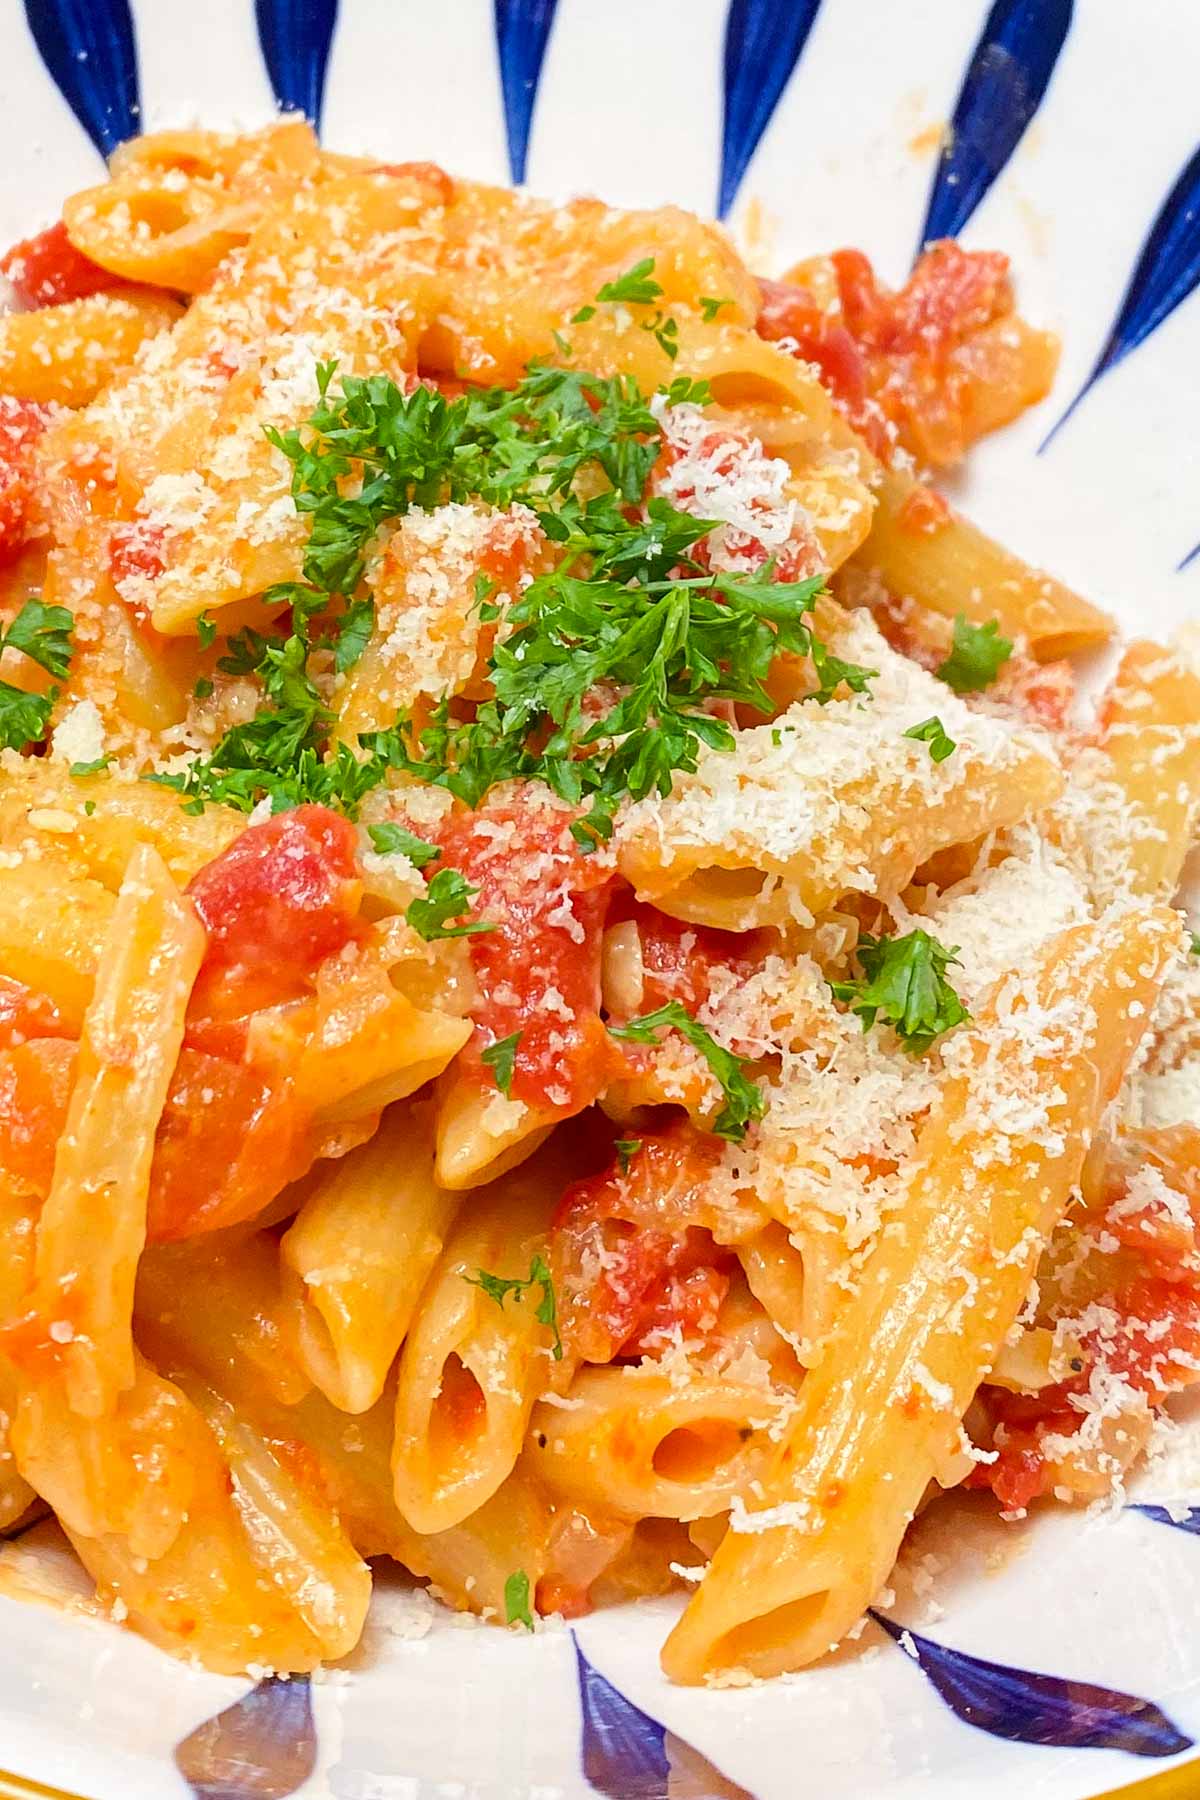 Penne pasta and tomato sauce, garnished with parsley in blue and white decorative bowl.